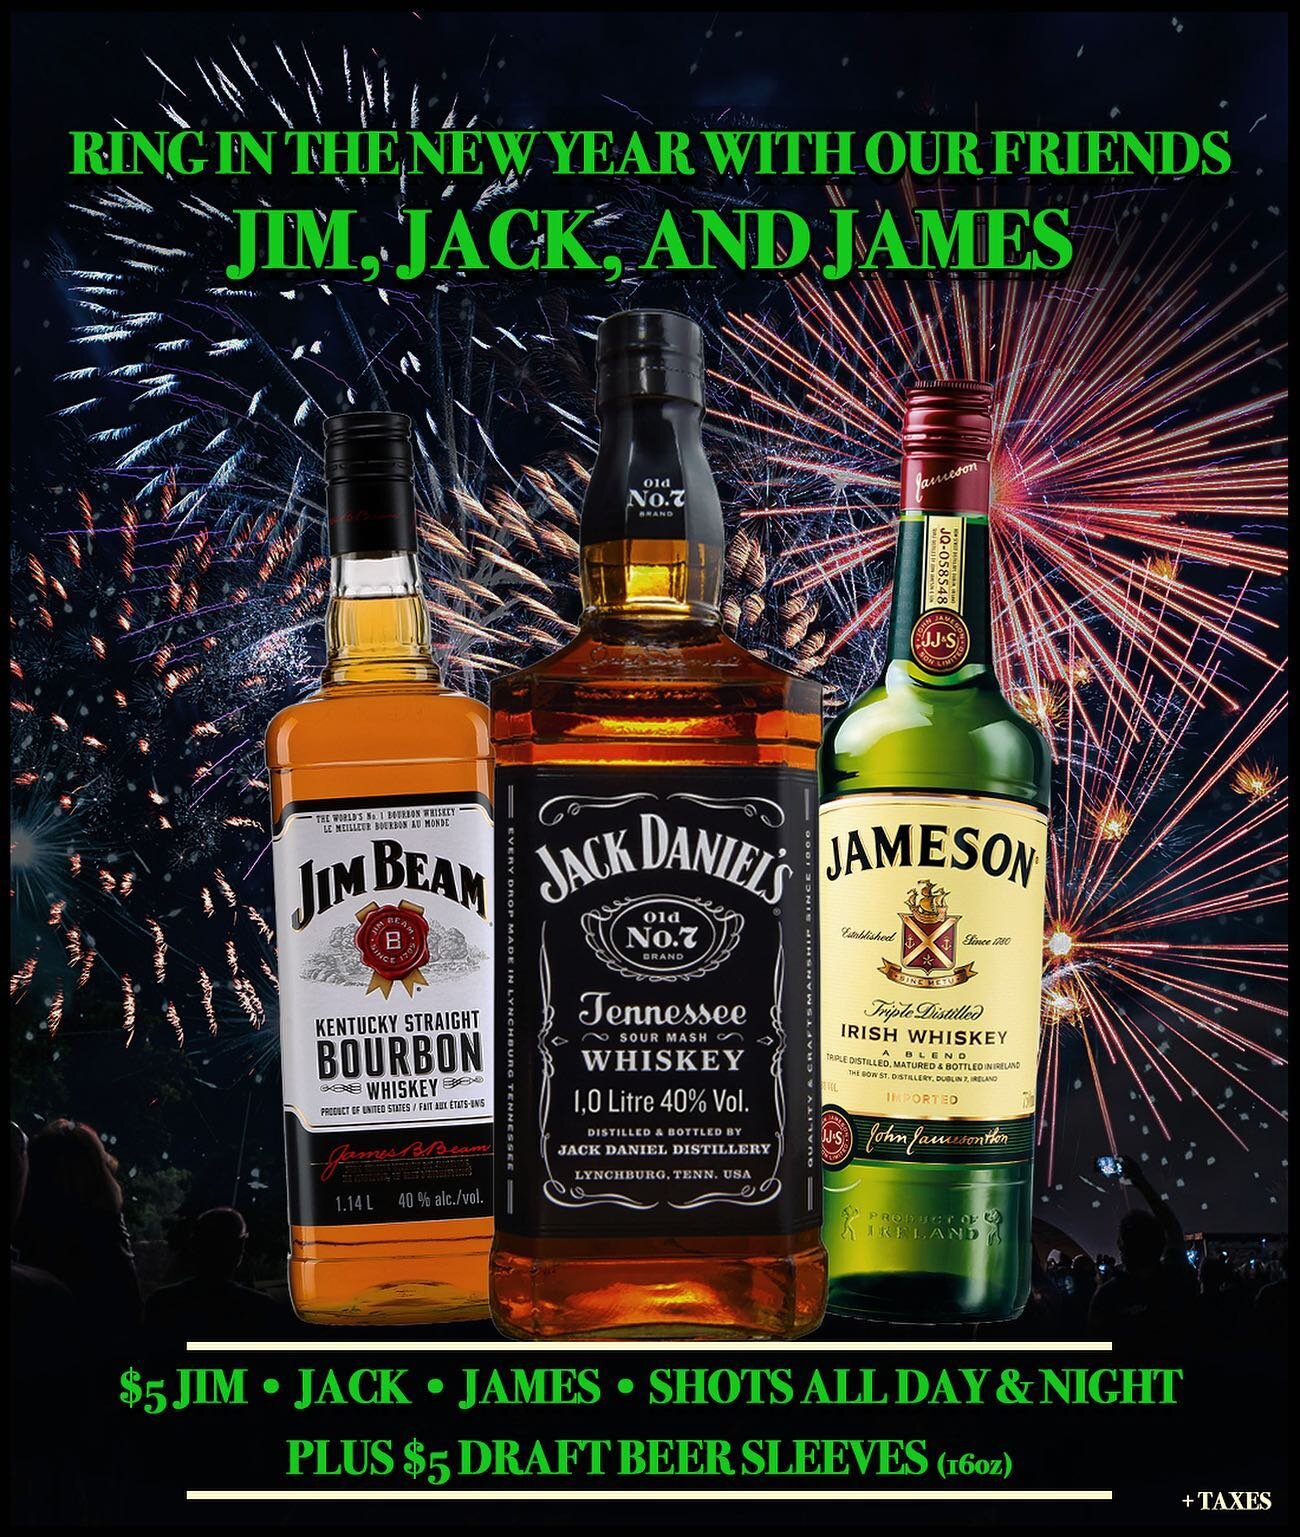 Get your pre-drinking on with us before celebrating the #newyear #countdown &mdash; on NYE we got #jimbeam #jamesons and #jackdaniels #shots for 5 bucks PLUS all #draftbeer sleeves for $5. Sayonara 2020 🙌